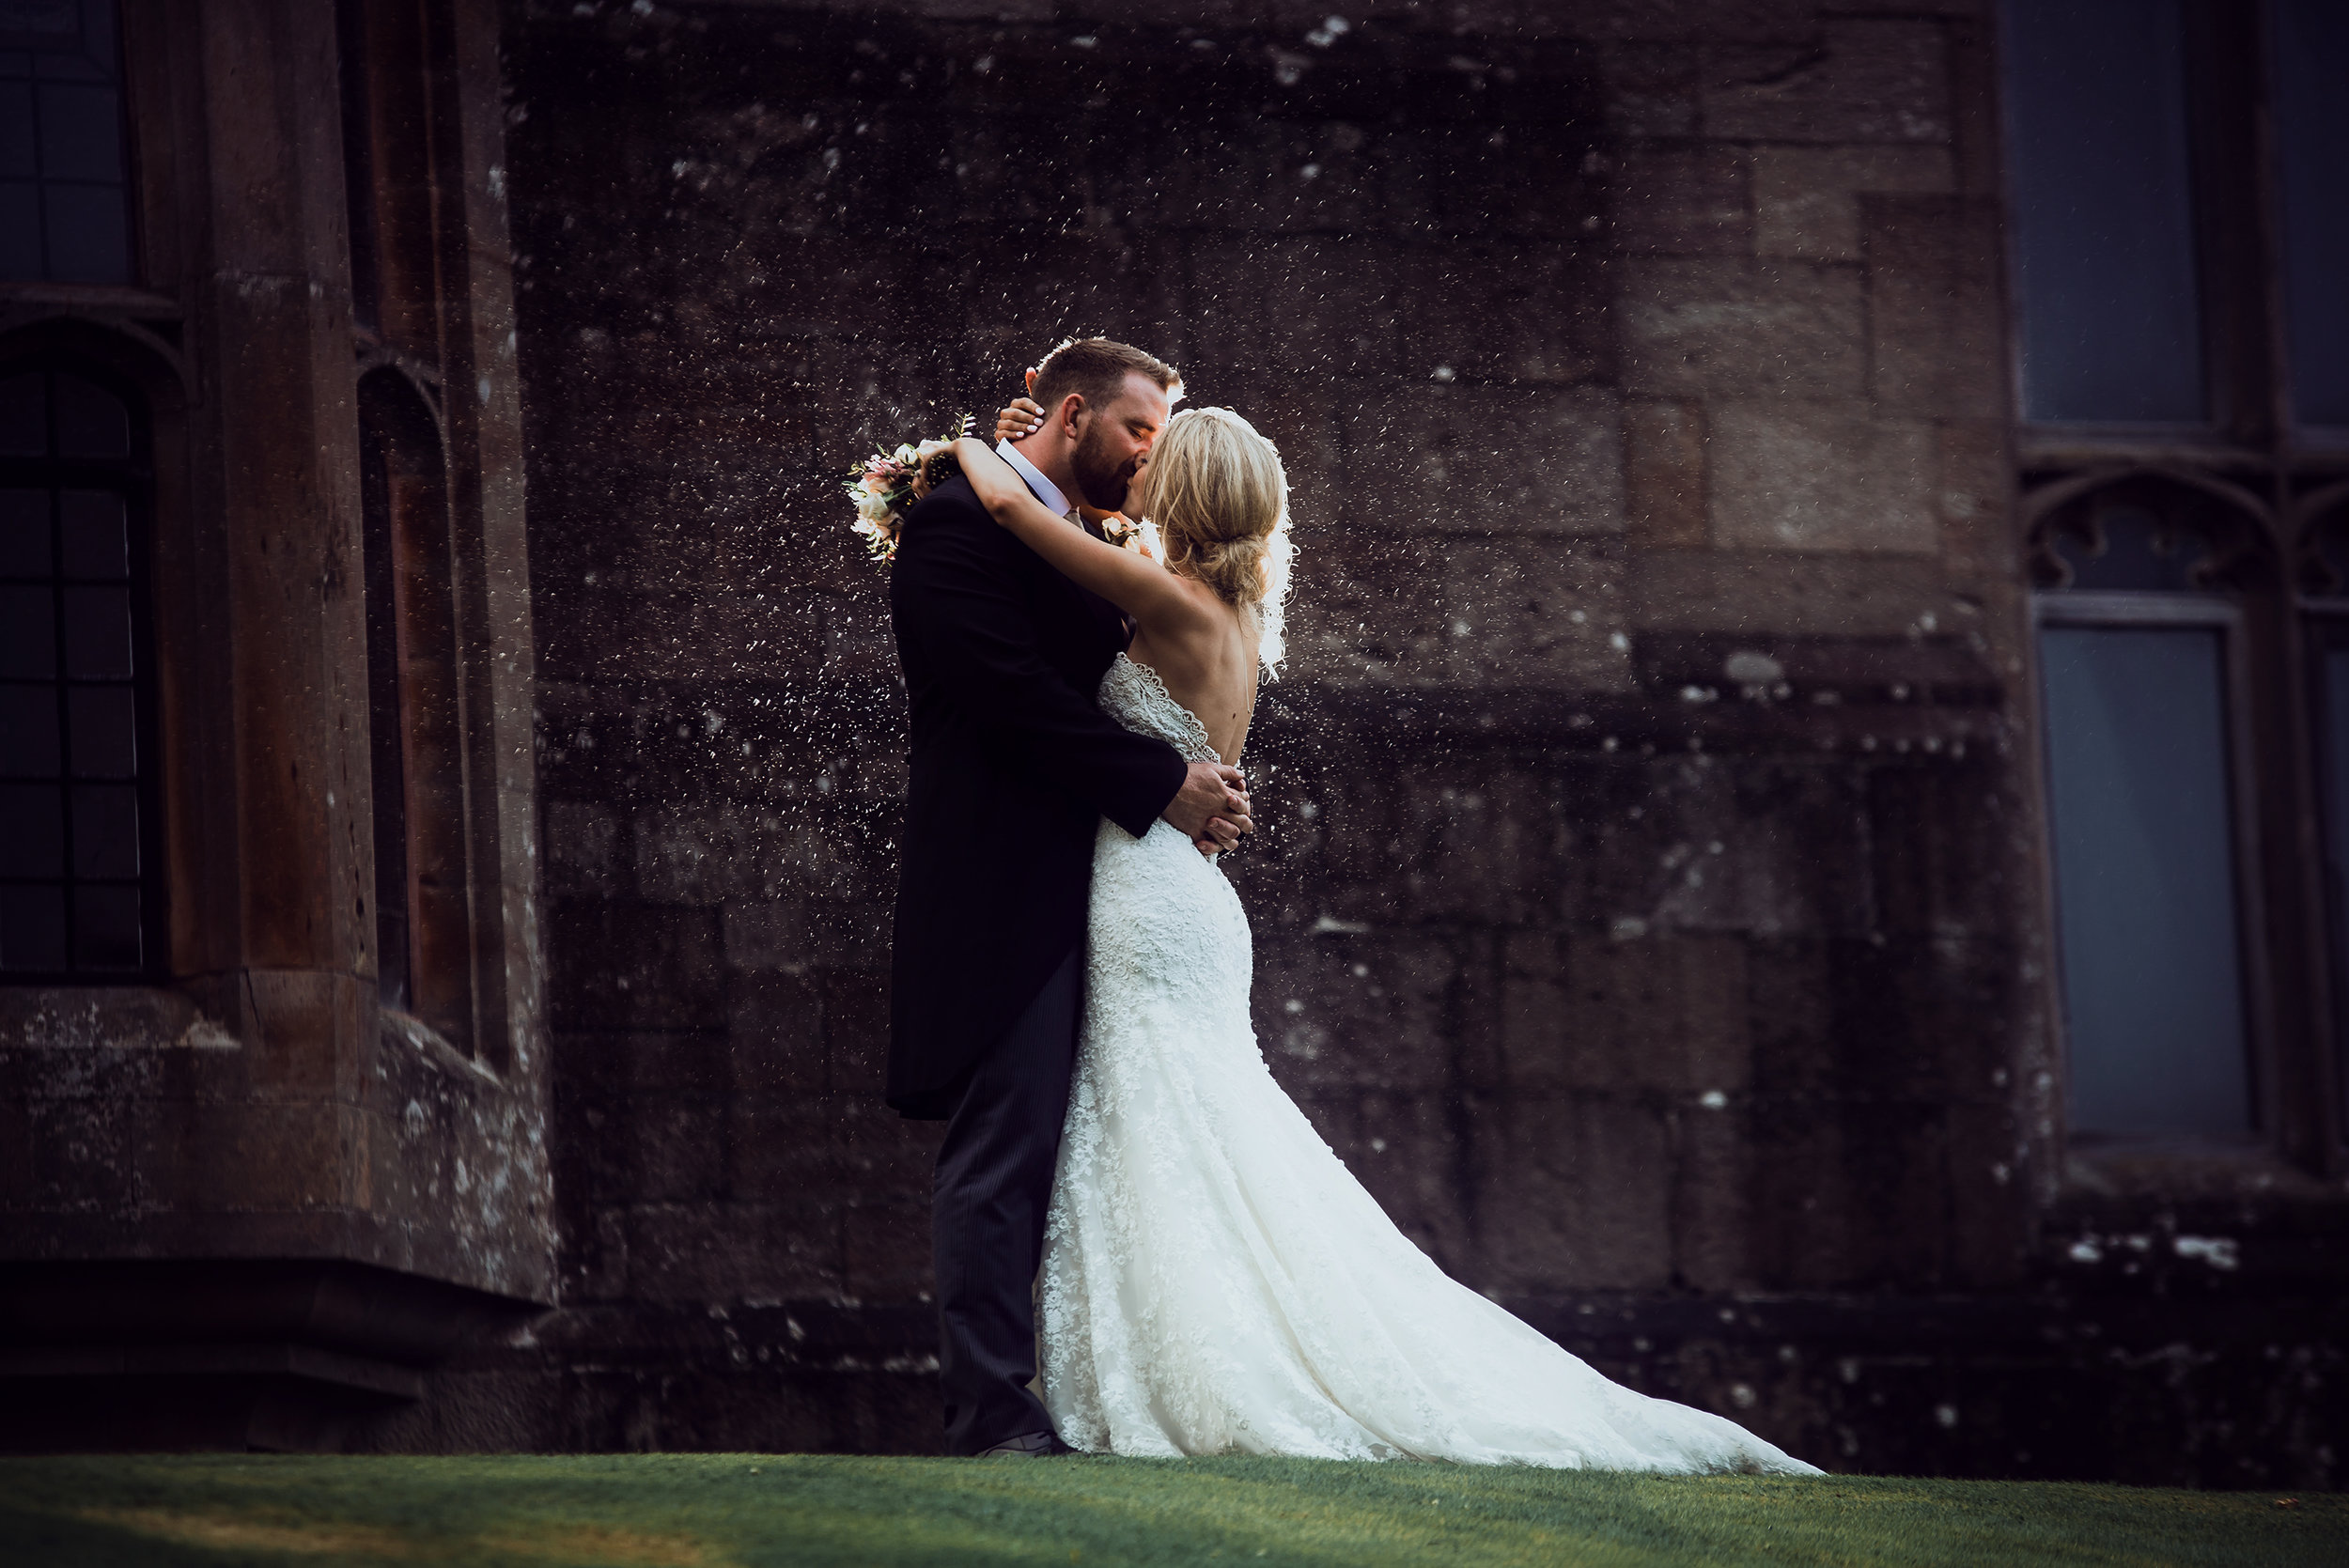 The bride and groom kissing in the rain